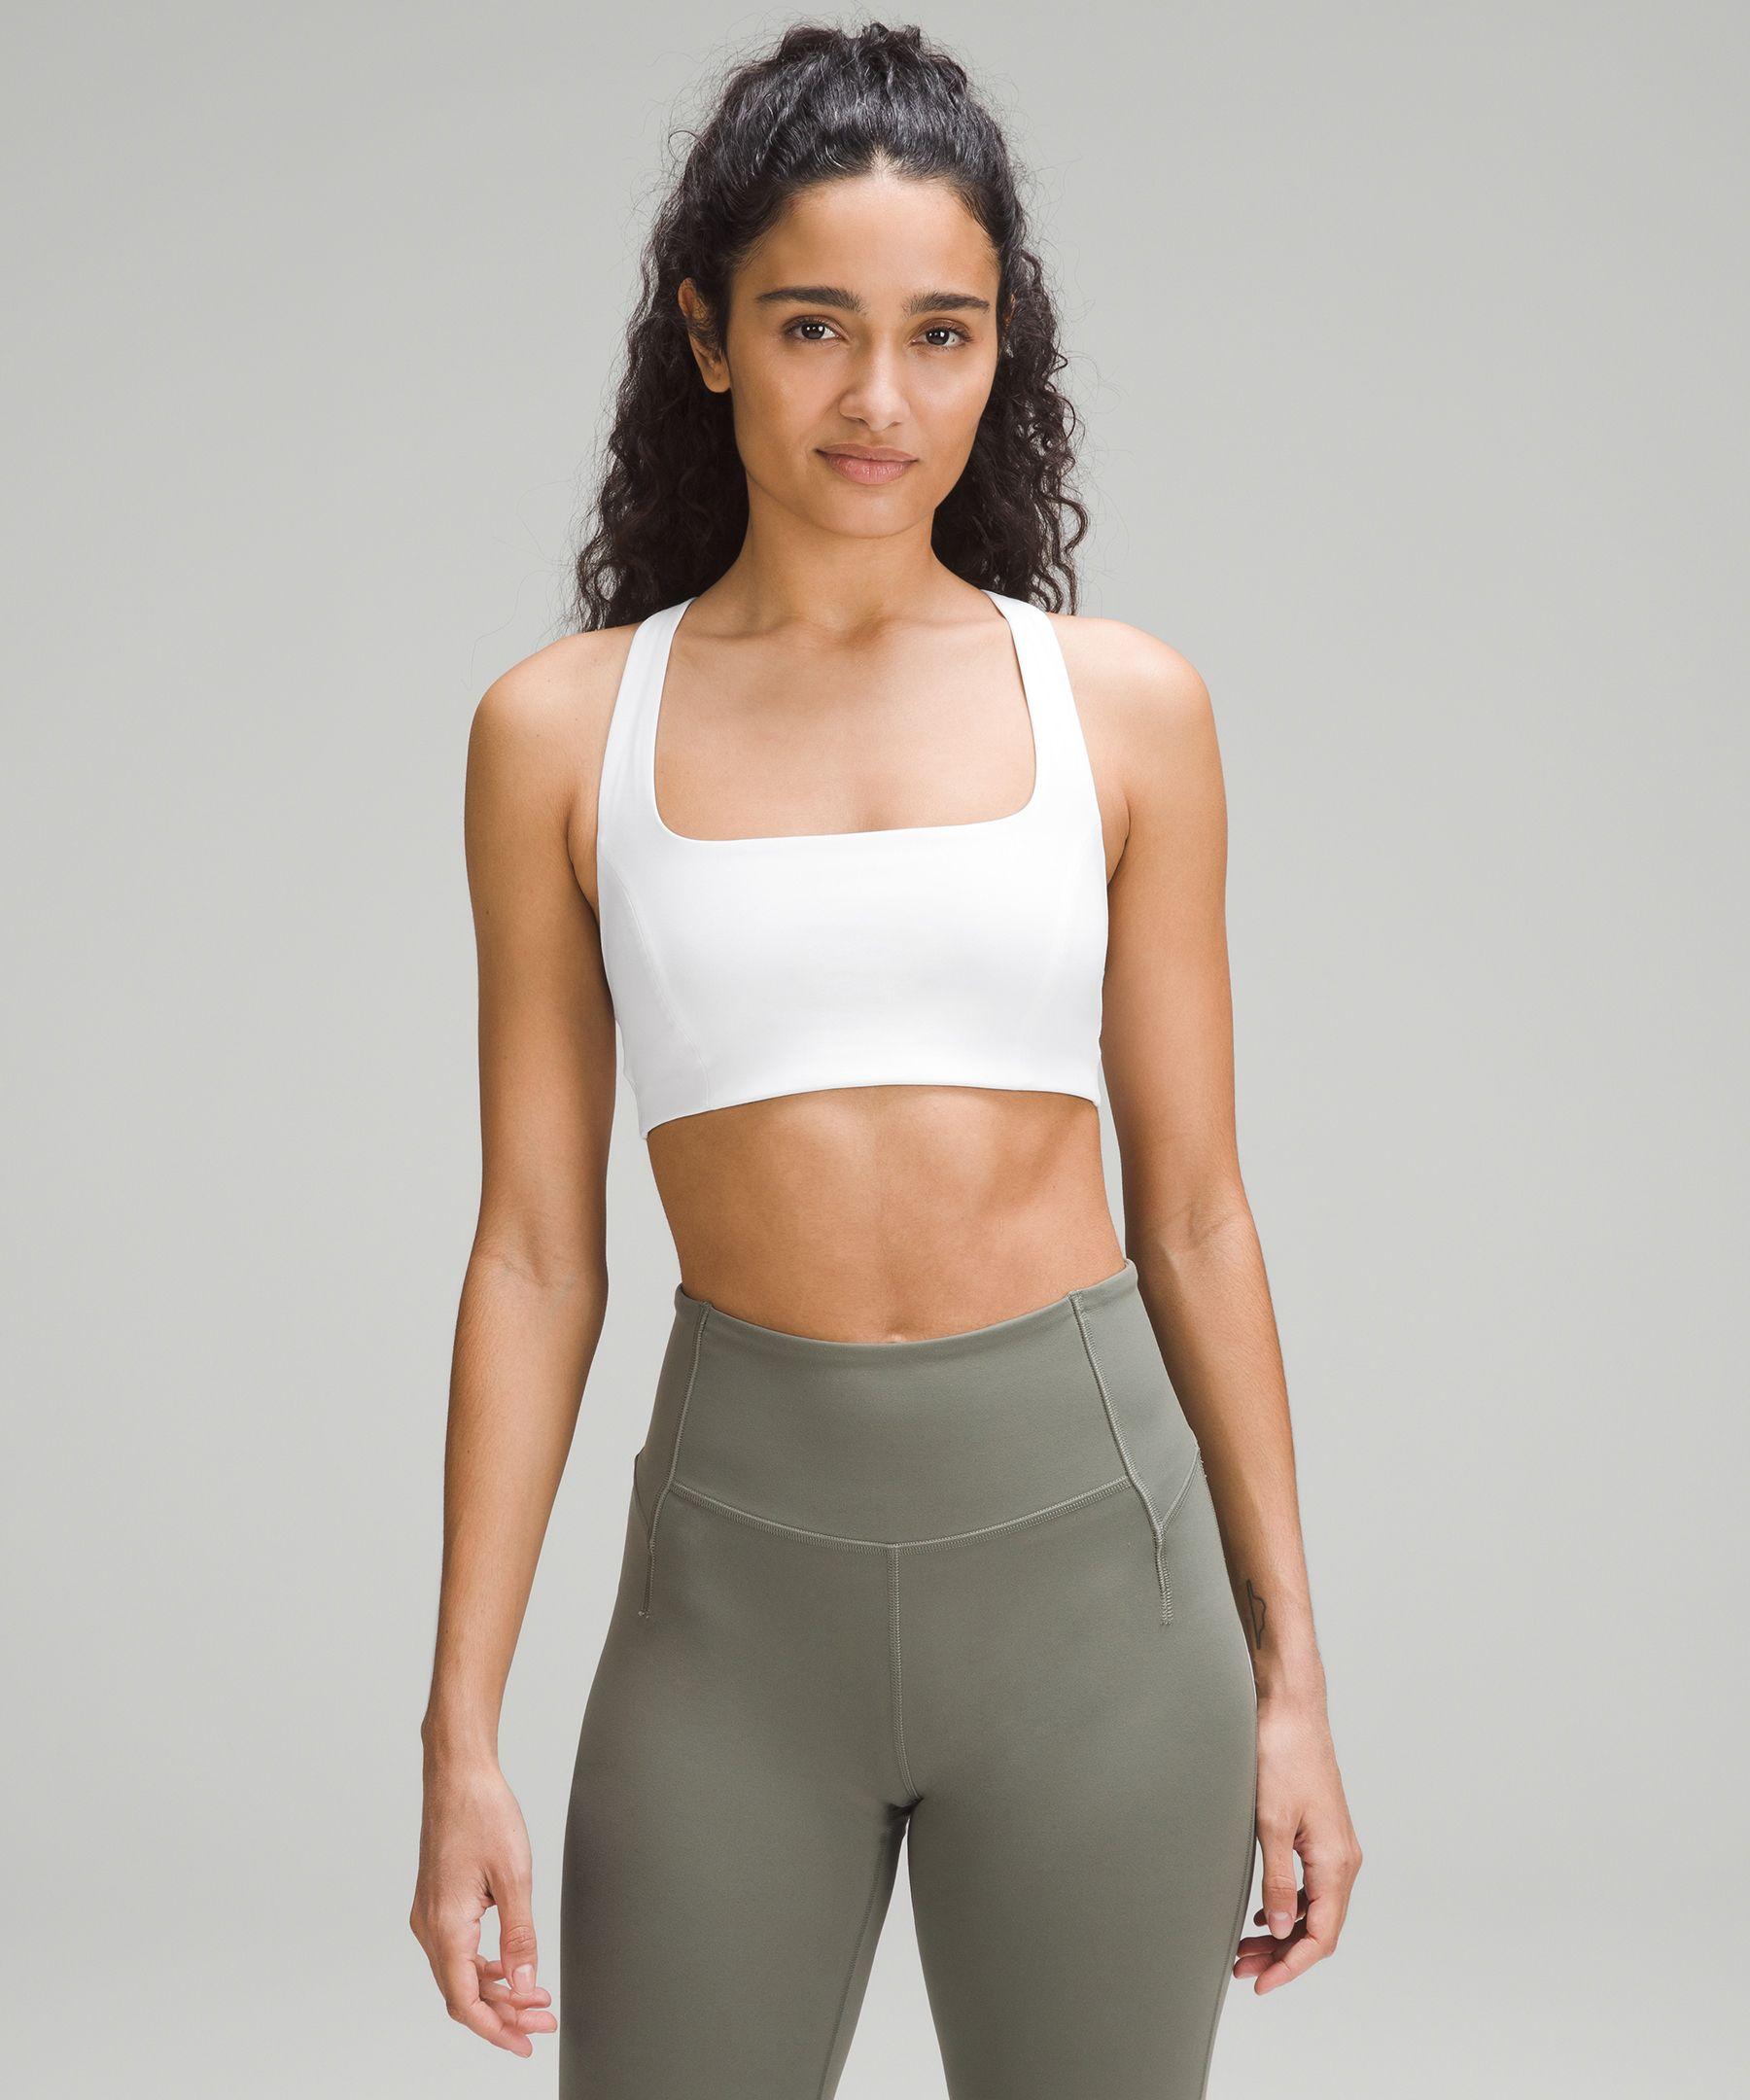 lululemon athletica Smoothcover Yoga Sports Bra Light Support in Gray